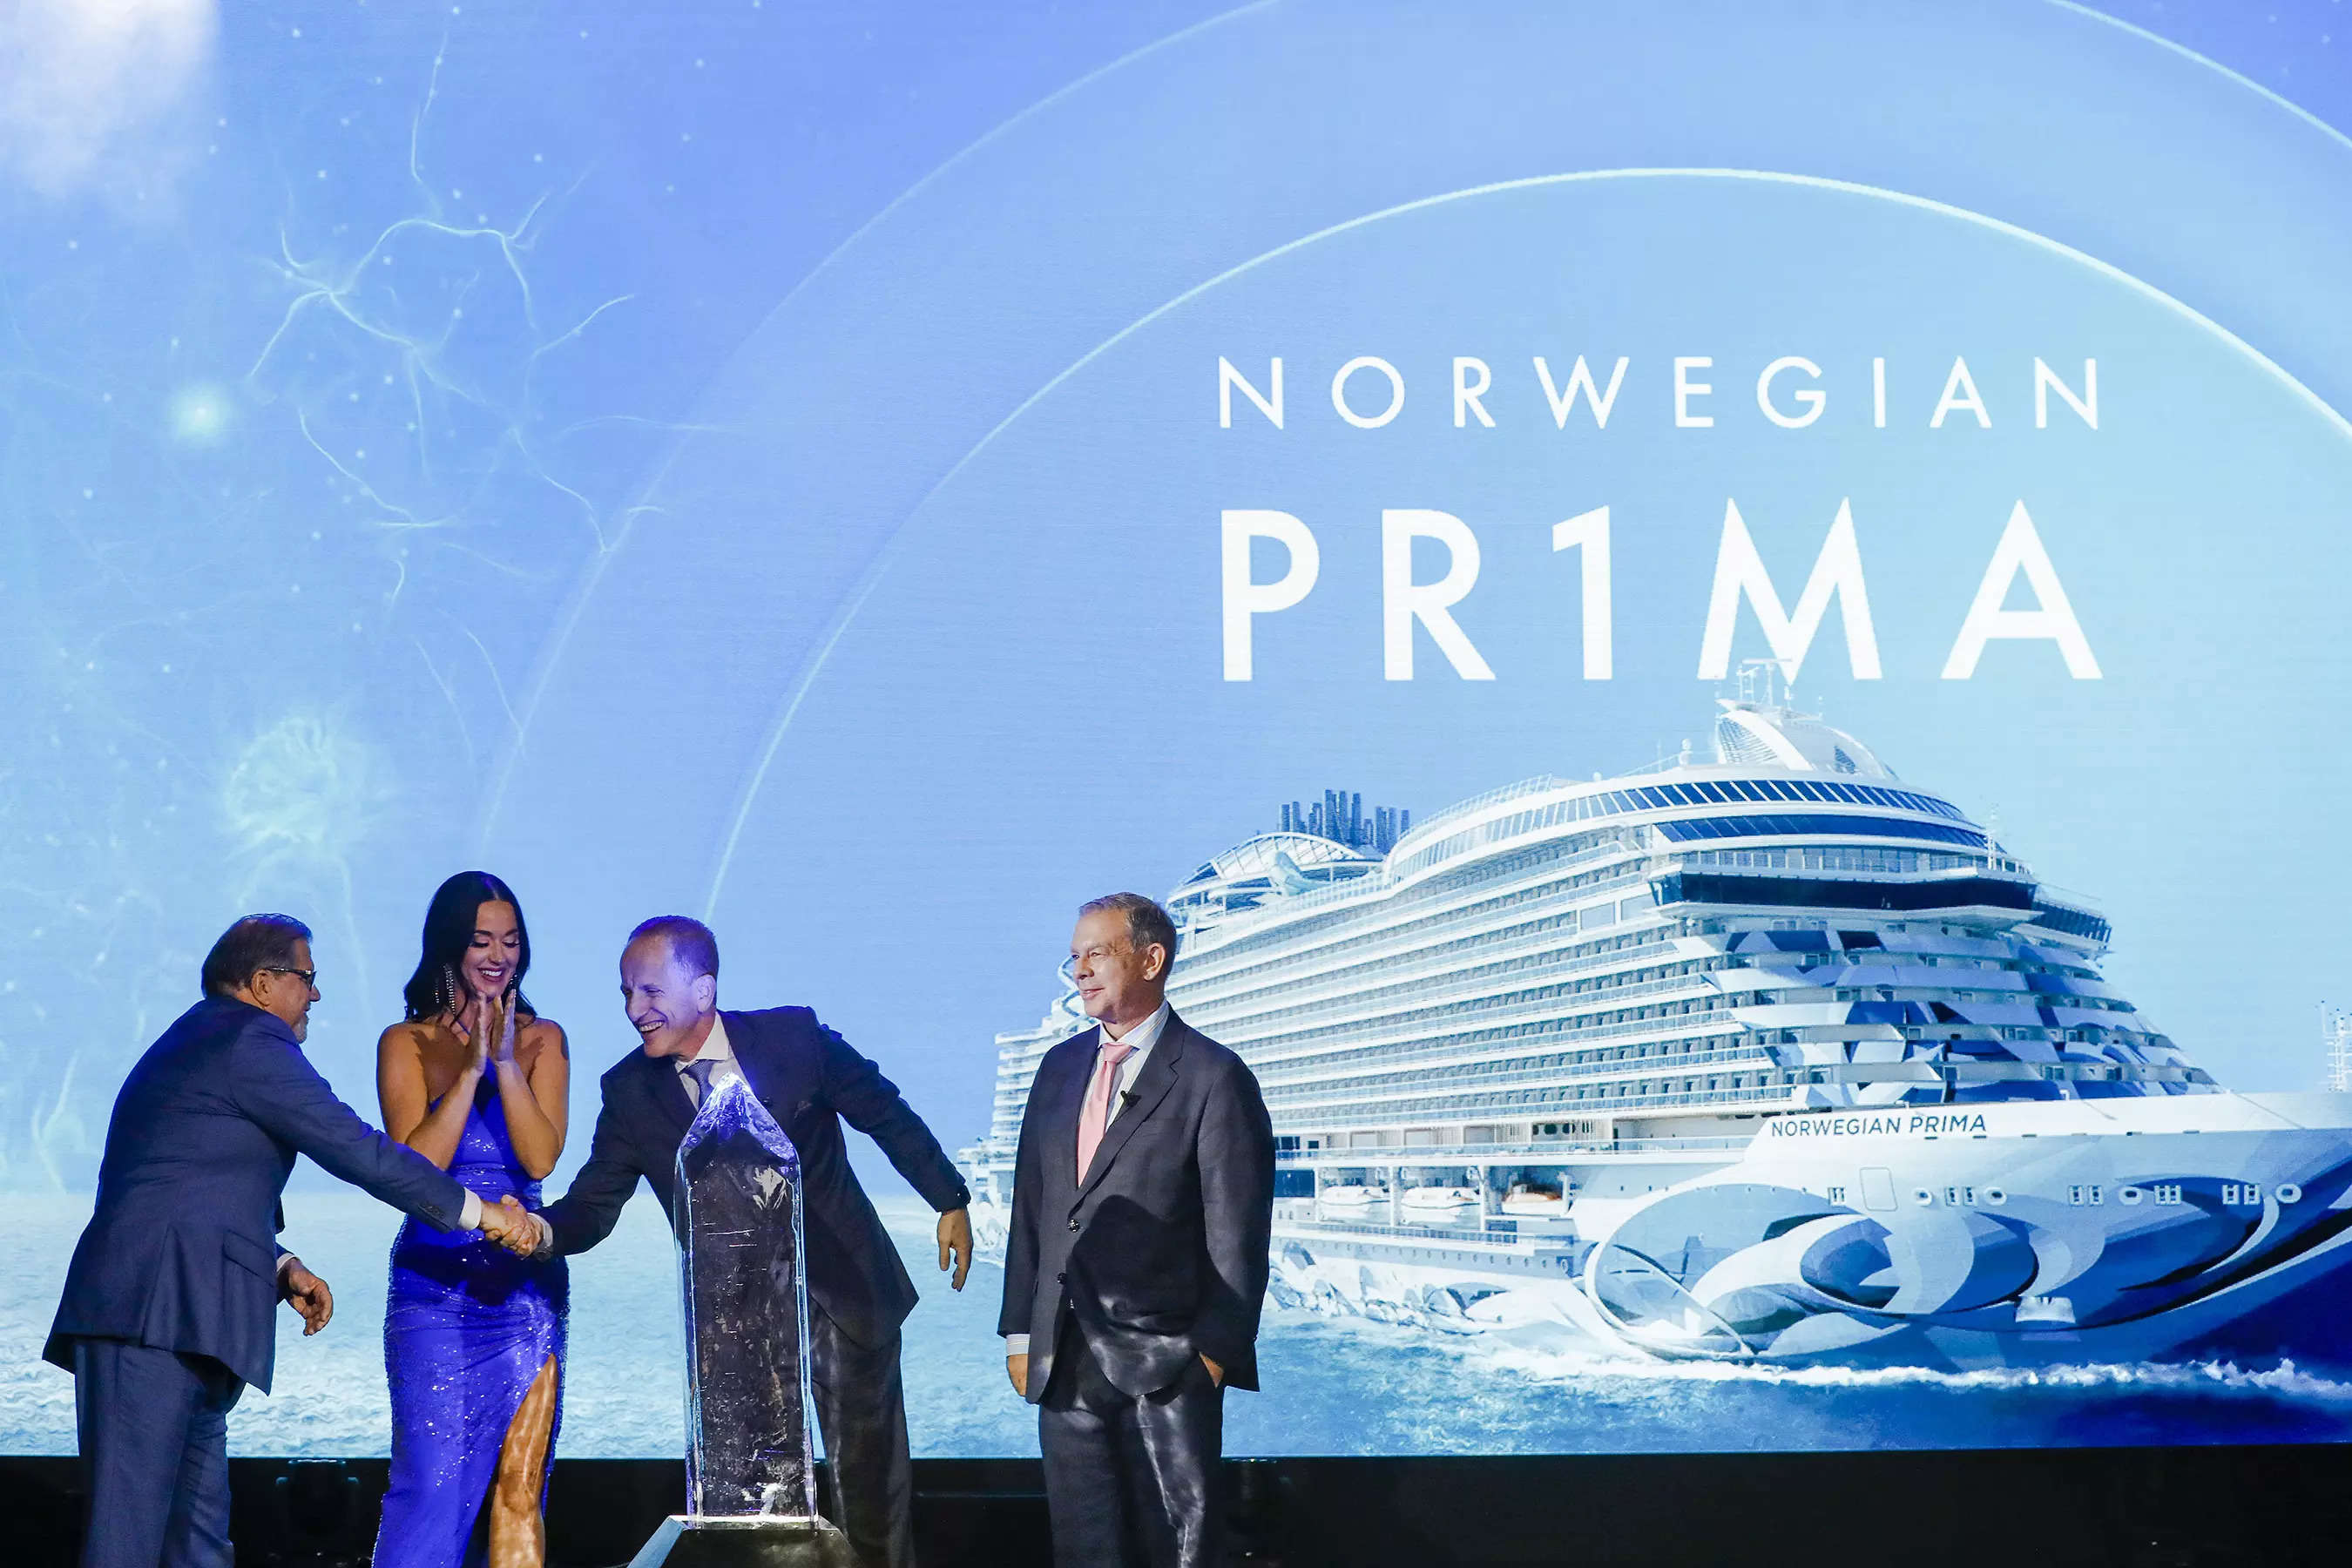 Norwegian Cruise Line christens its newest ship NCL Prima, inaugural sailing on September 3